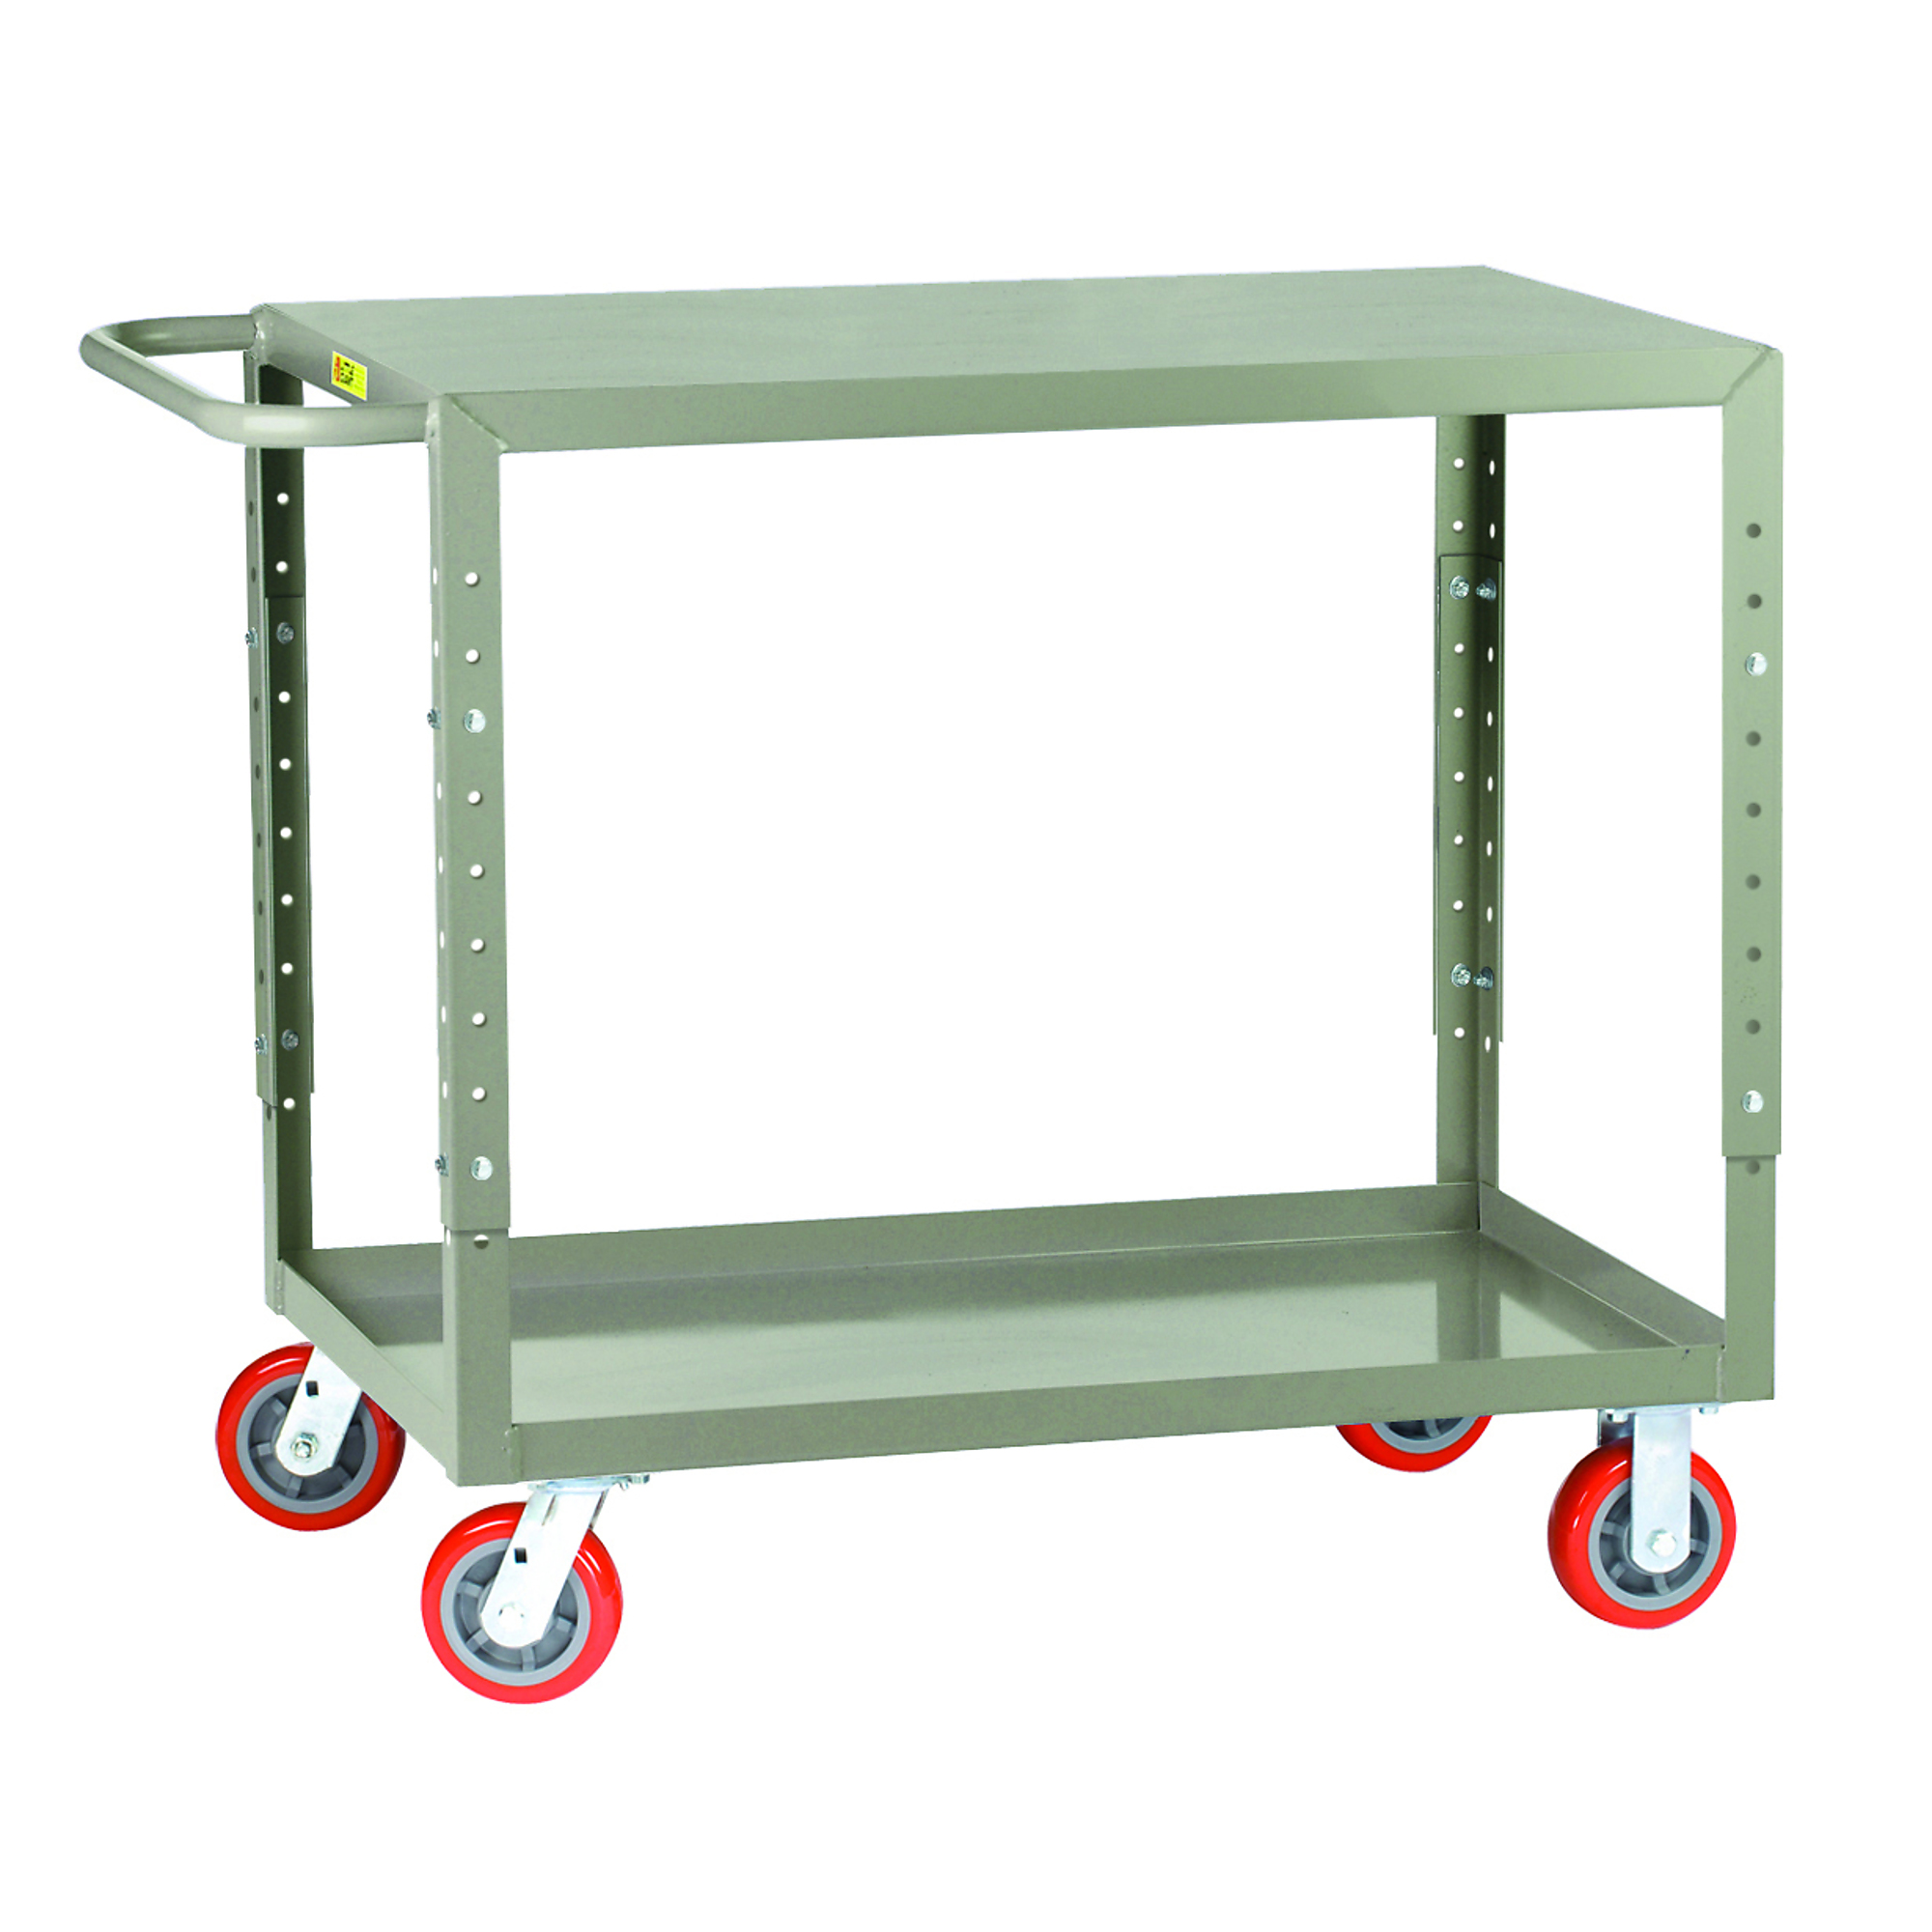 Little Giant, Adj. Height Welded Service Cart, 24x48, 1200 lbs, Total Capacity 1200 lb, Shelves (qty.) 2, Material Carbon Steel, Model LG-2448-5PYBKAH